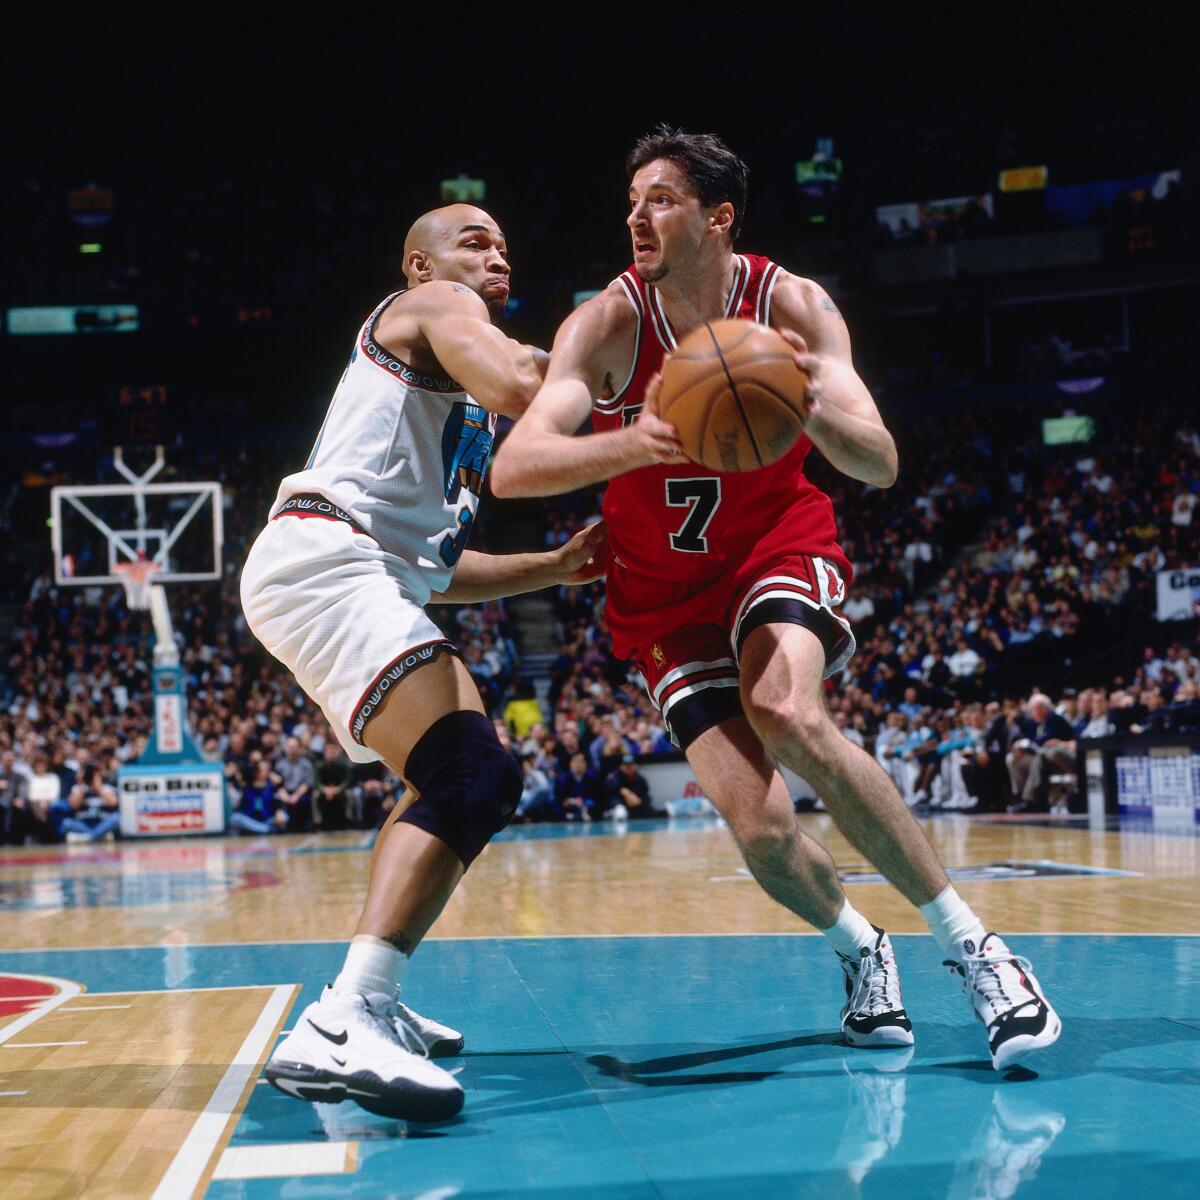 Bulls forward Toni Kukoc drives against a Vancouver Grizzlies defender during a game in 1997.